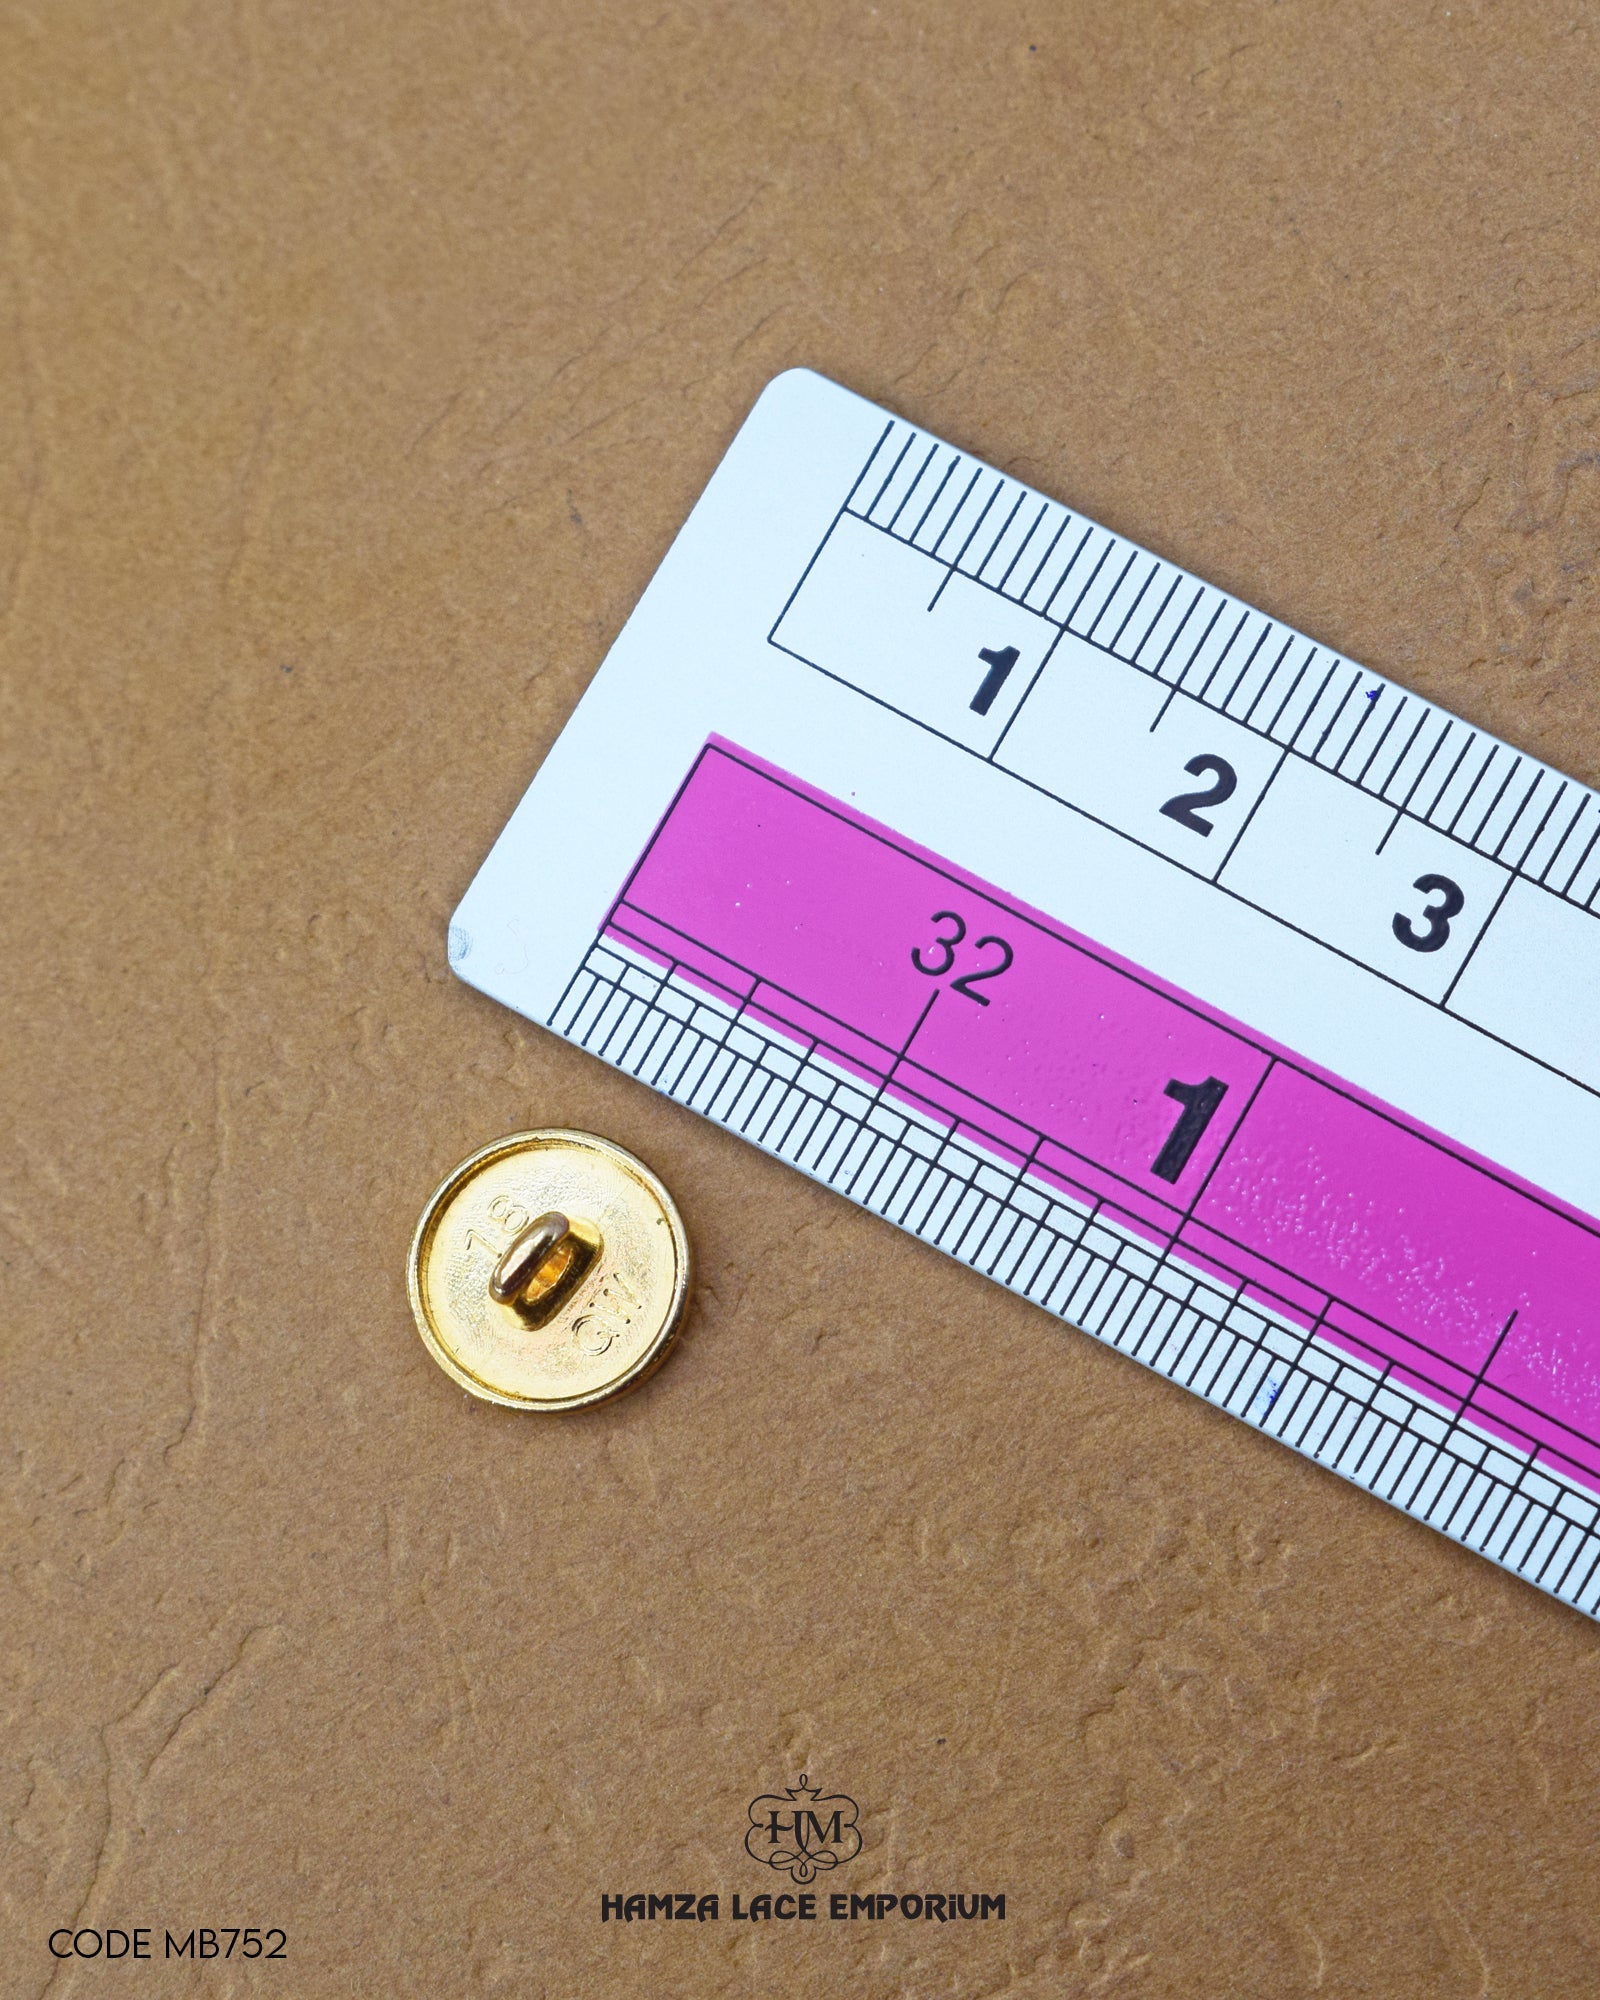 The dimensions of the 'Golden Metal Button MB752' are determined using a ruler.